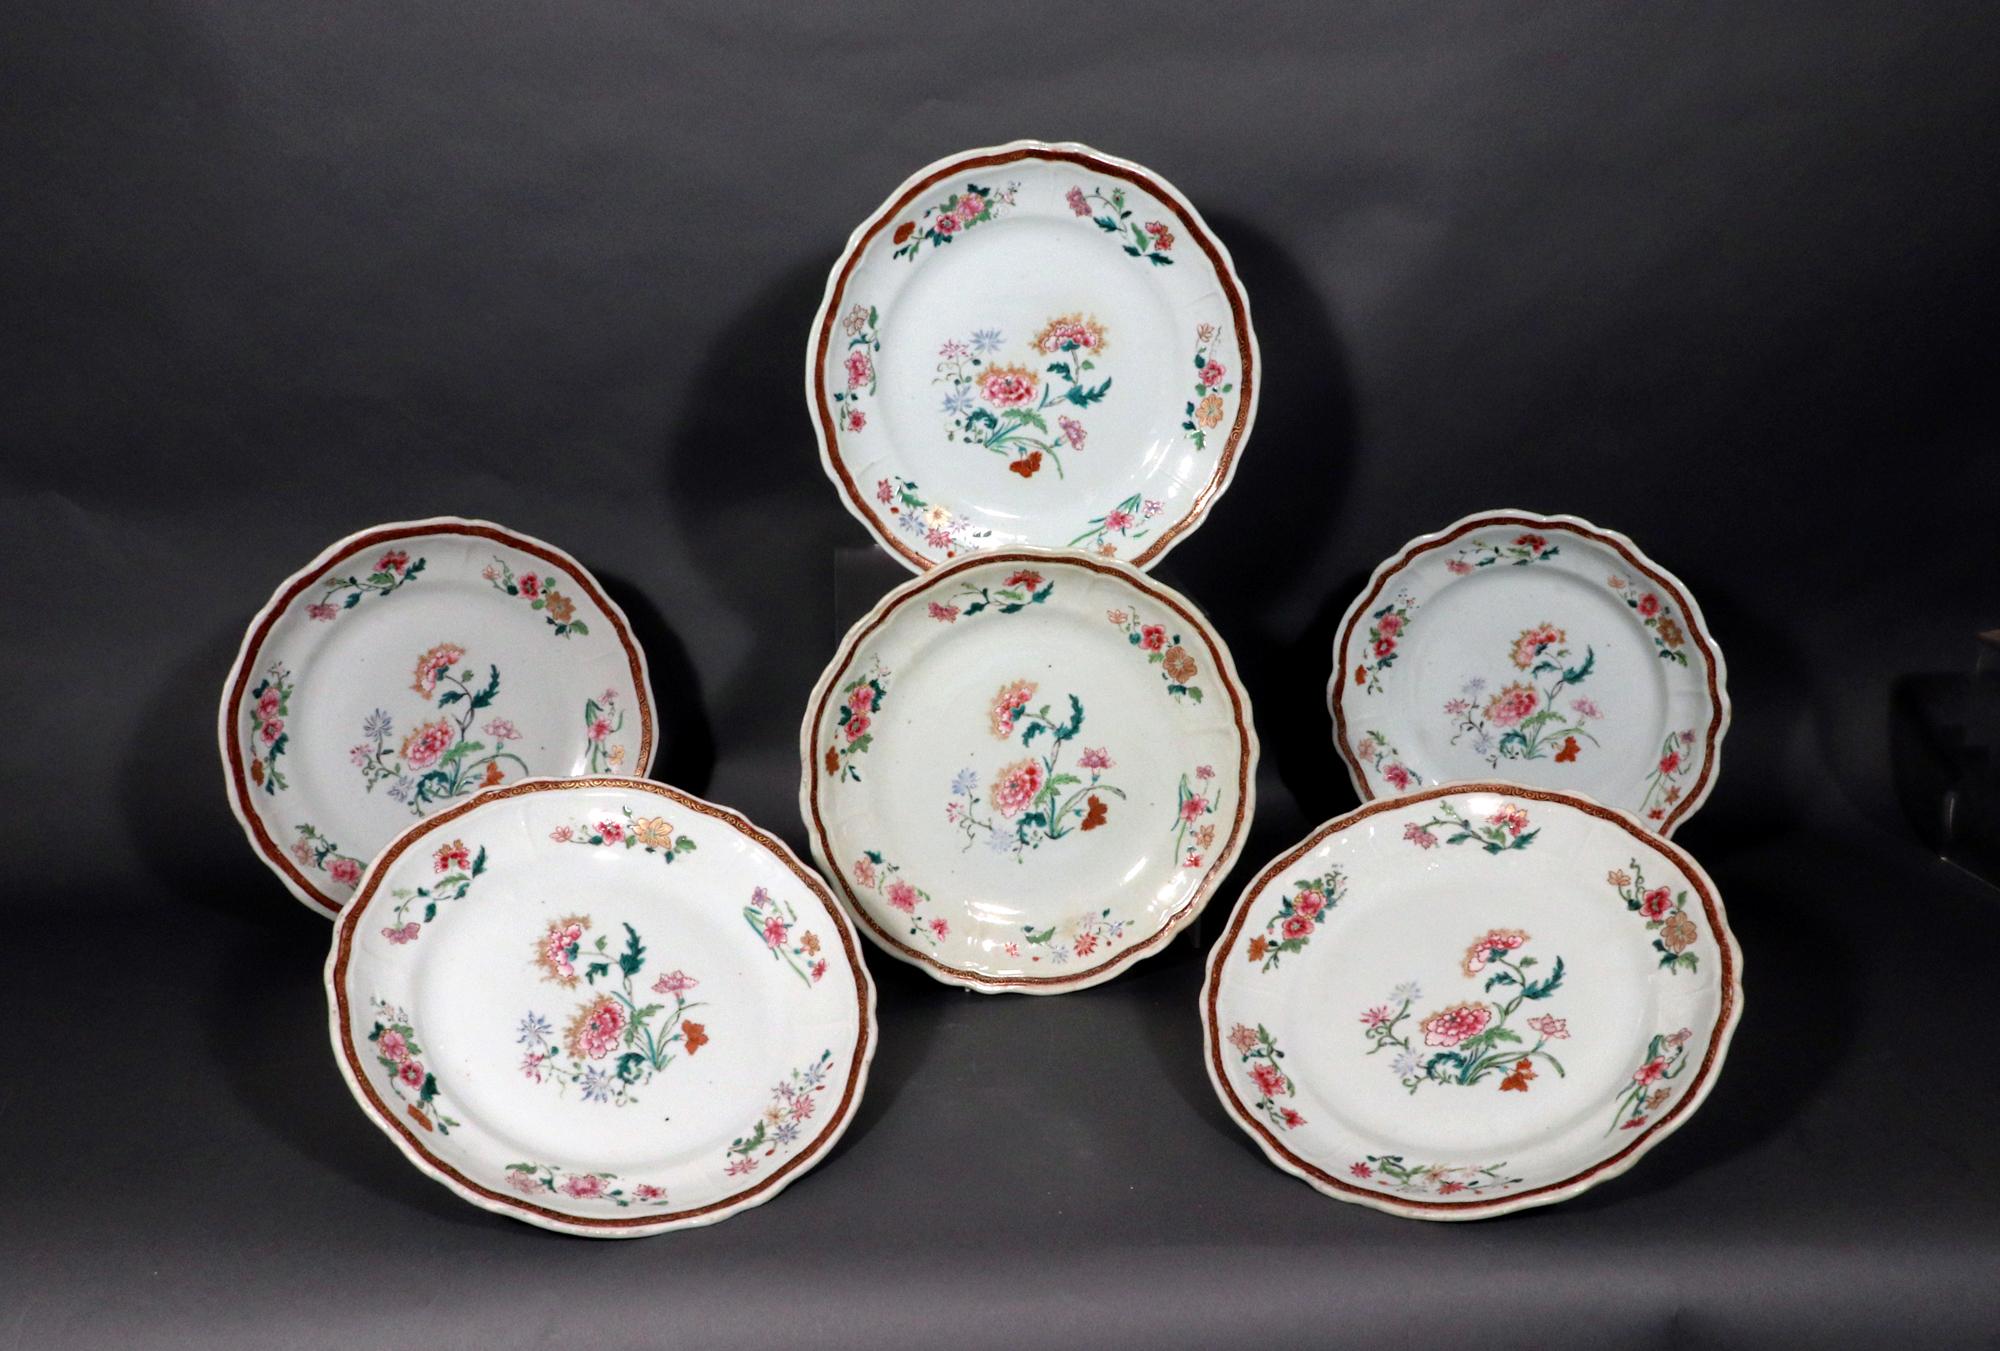 Chinese Export Porcelain Famille Rose Botanical Large Plates,
Set of Six Large Plates or Dishes,
Circa 1760

The Chinese Export famille rose plates are molded in the form of a European silver shape with an undulating rim.  The central well is